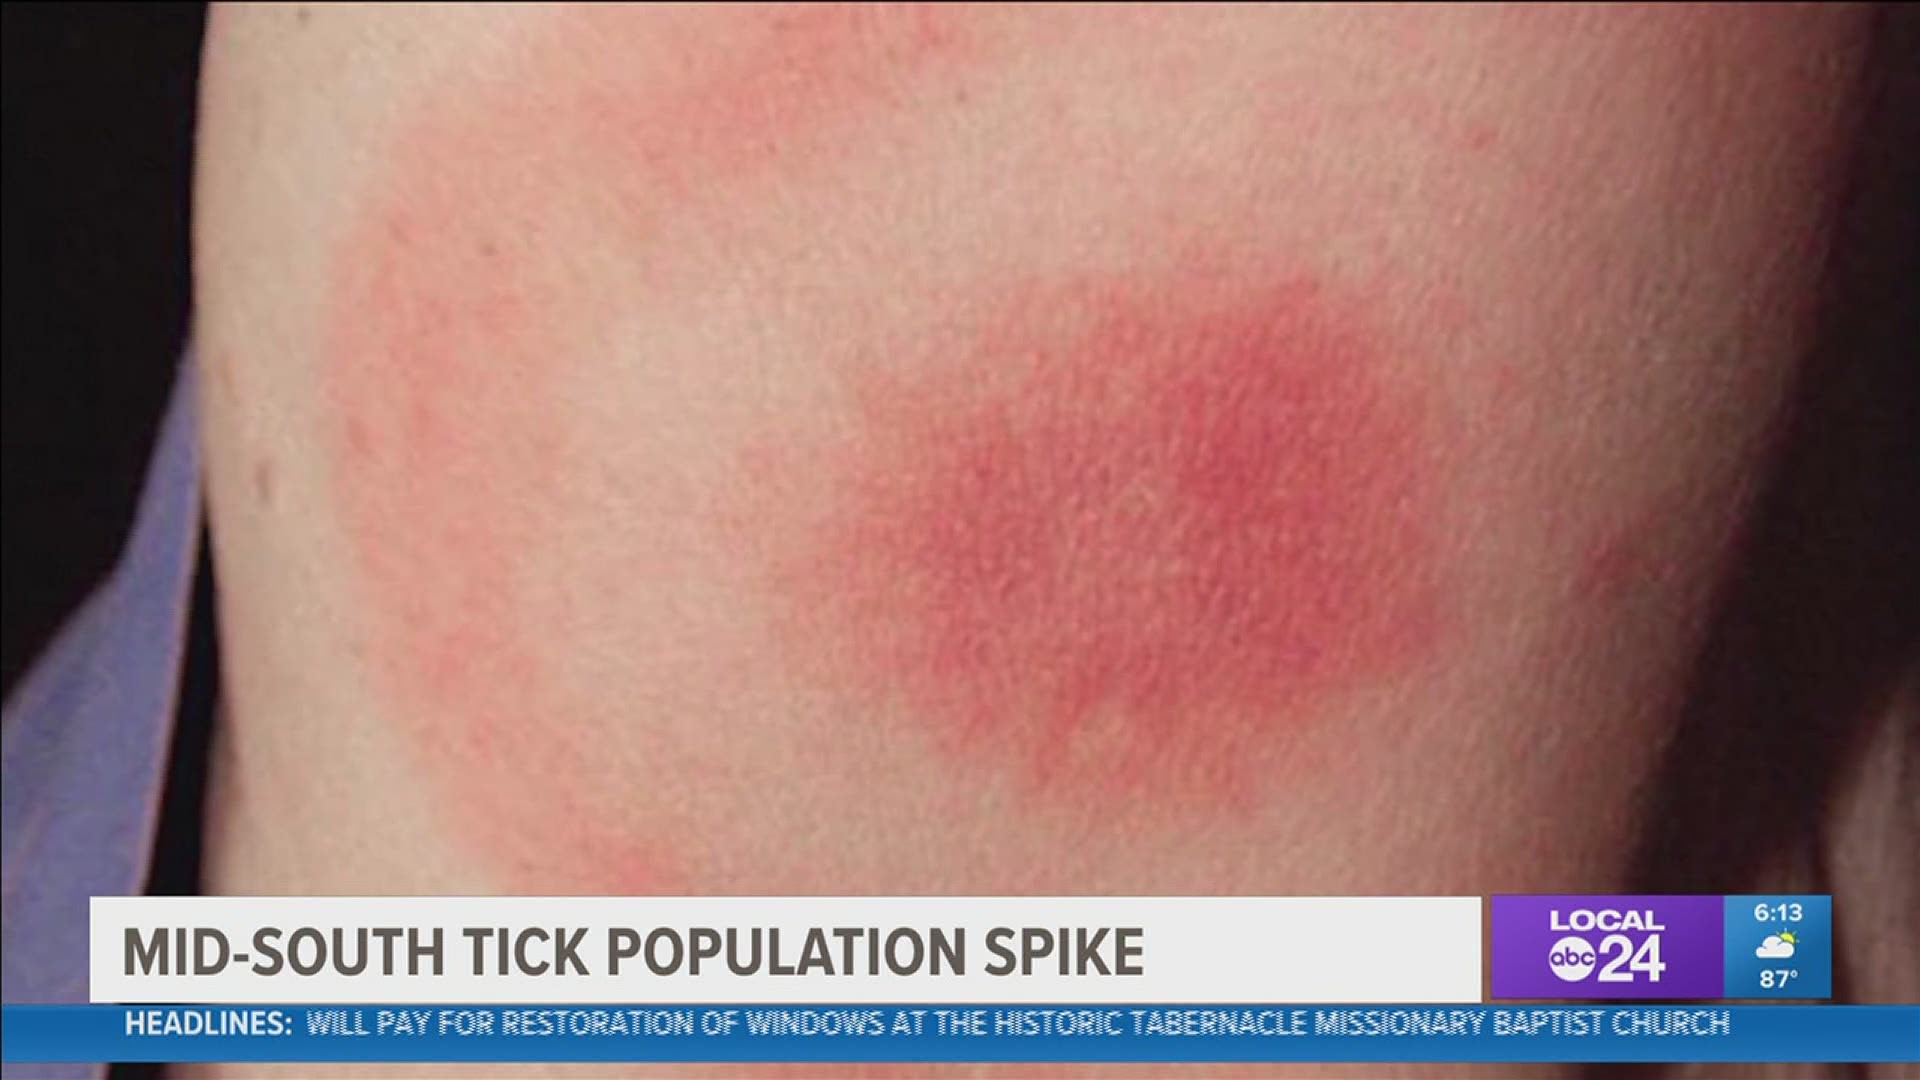 The local trend follows concern this week from national experts about a rise in the national tick population due to shorter winters and warmer temperatures.